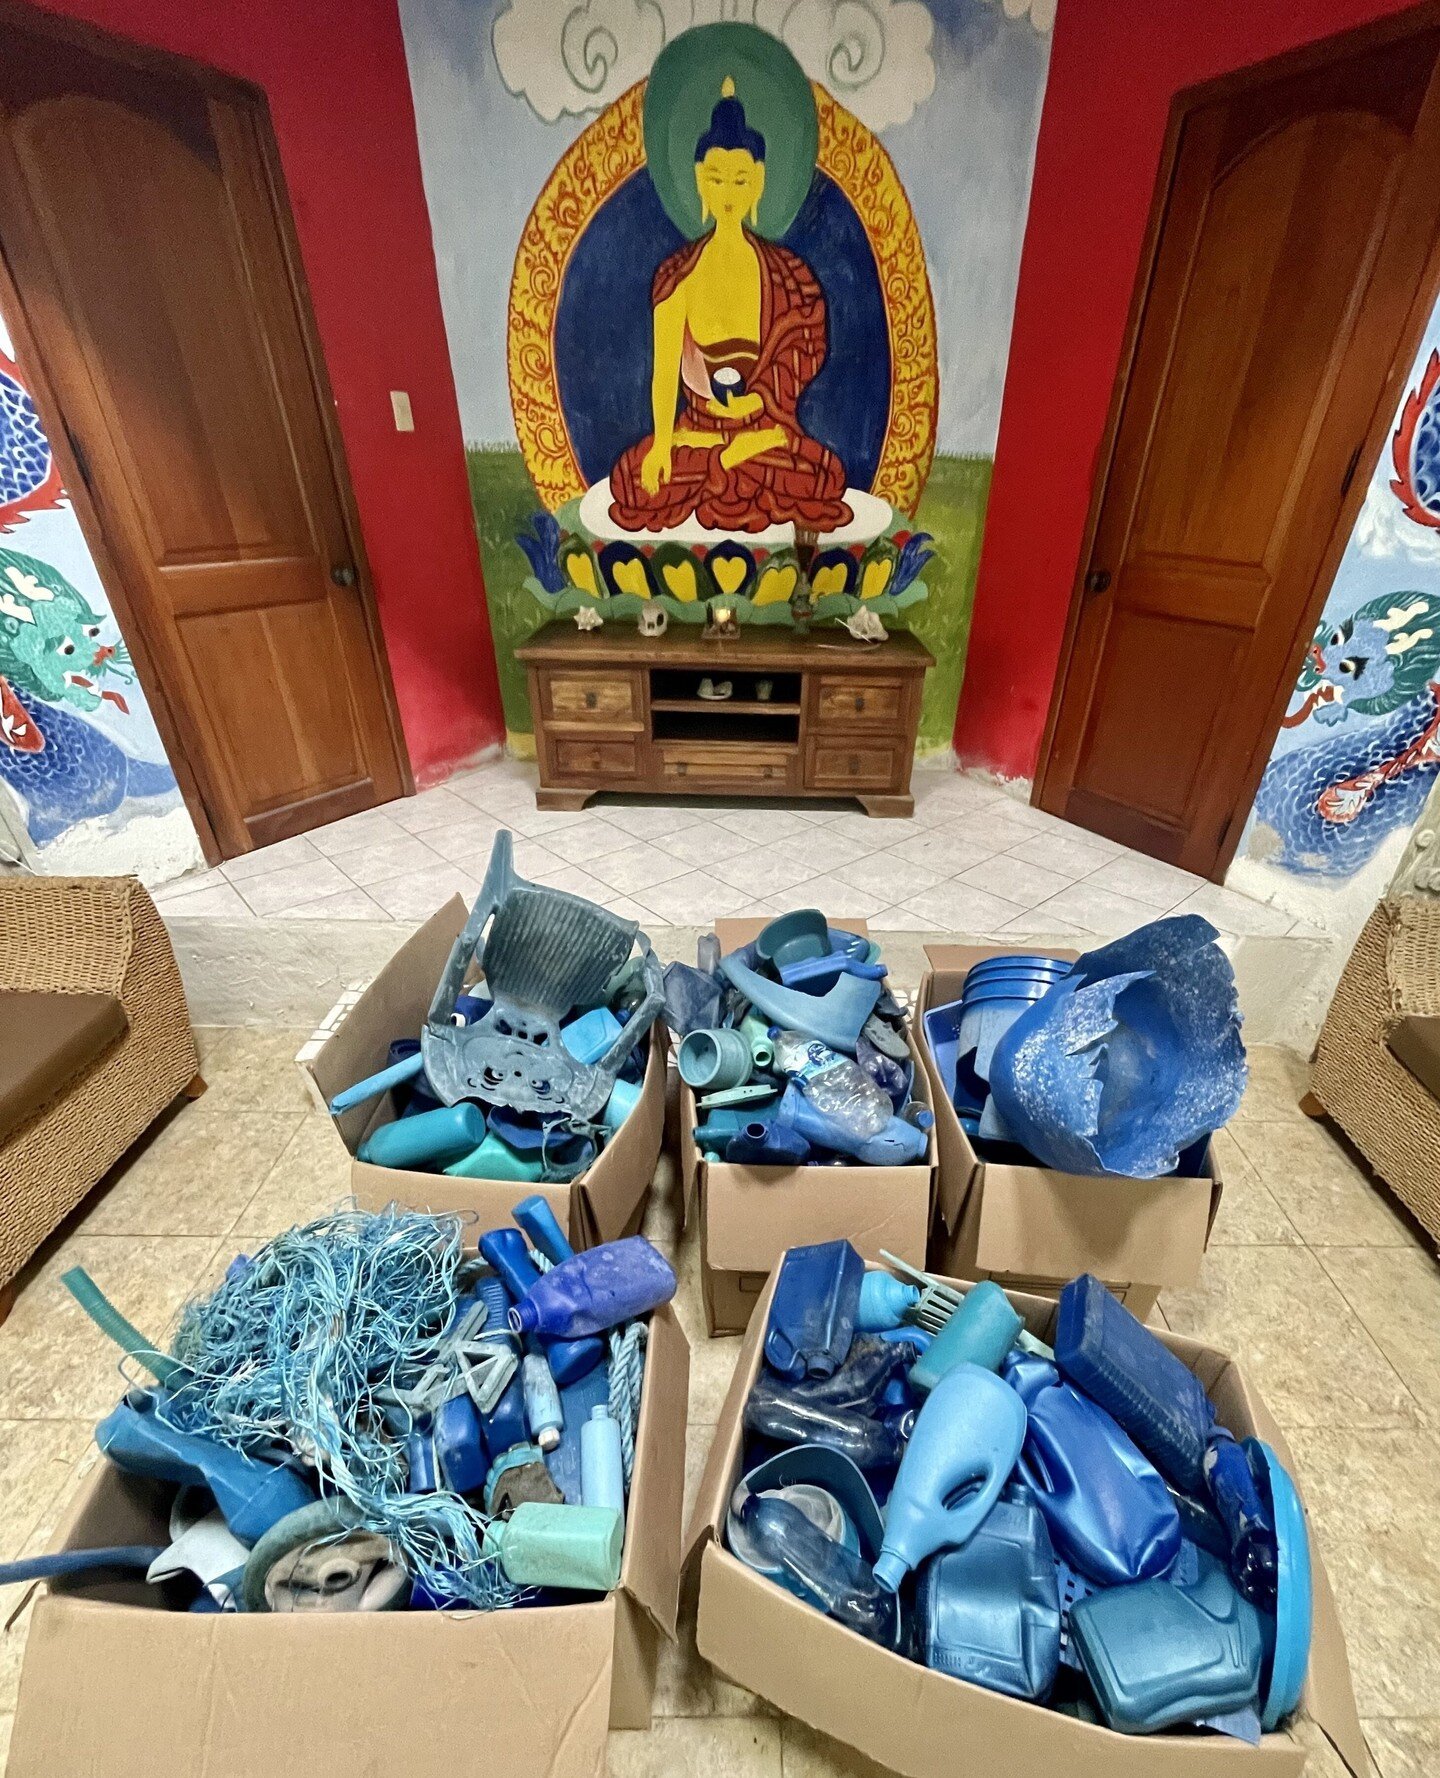 Organizing and packing up my blues for a group exhibition called &quot;Healing: Life in Balance&quot; at the Weltkulturen Museum in Frankfurt, Germany, Show opens November 2nd! @weltkulturen.museum 
#plasticpollution #climateaction #theblues